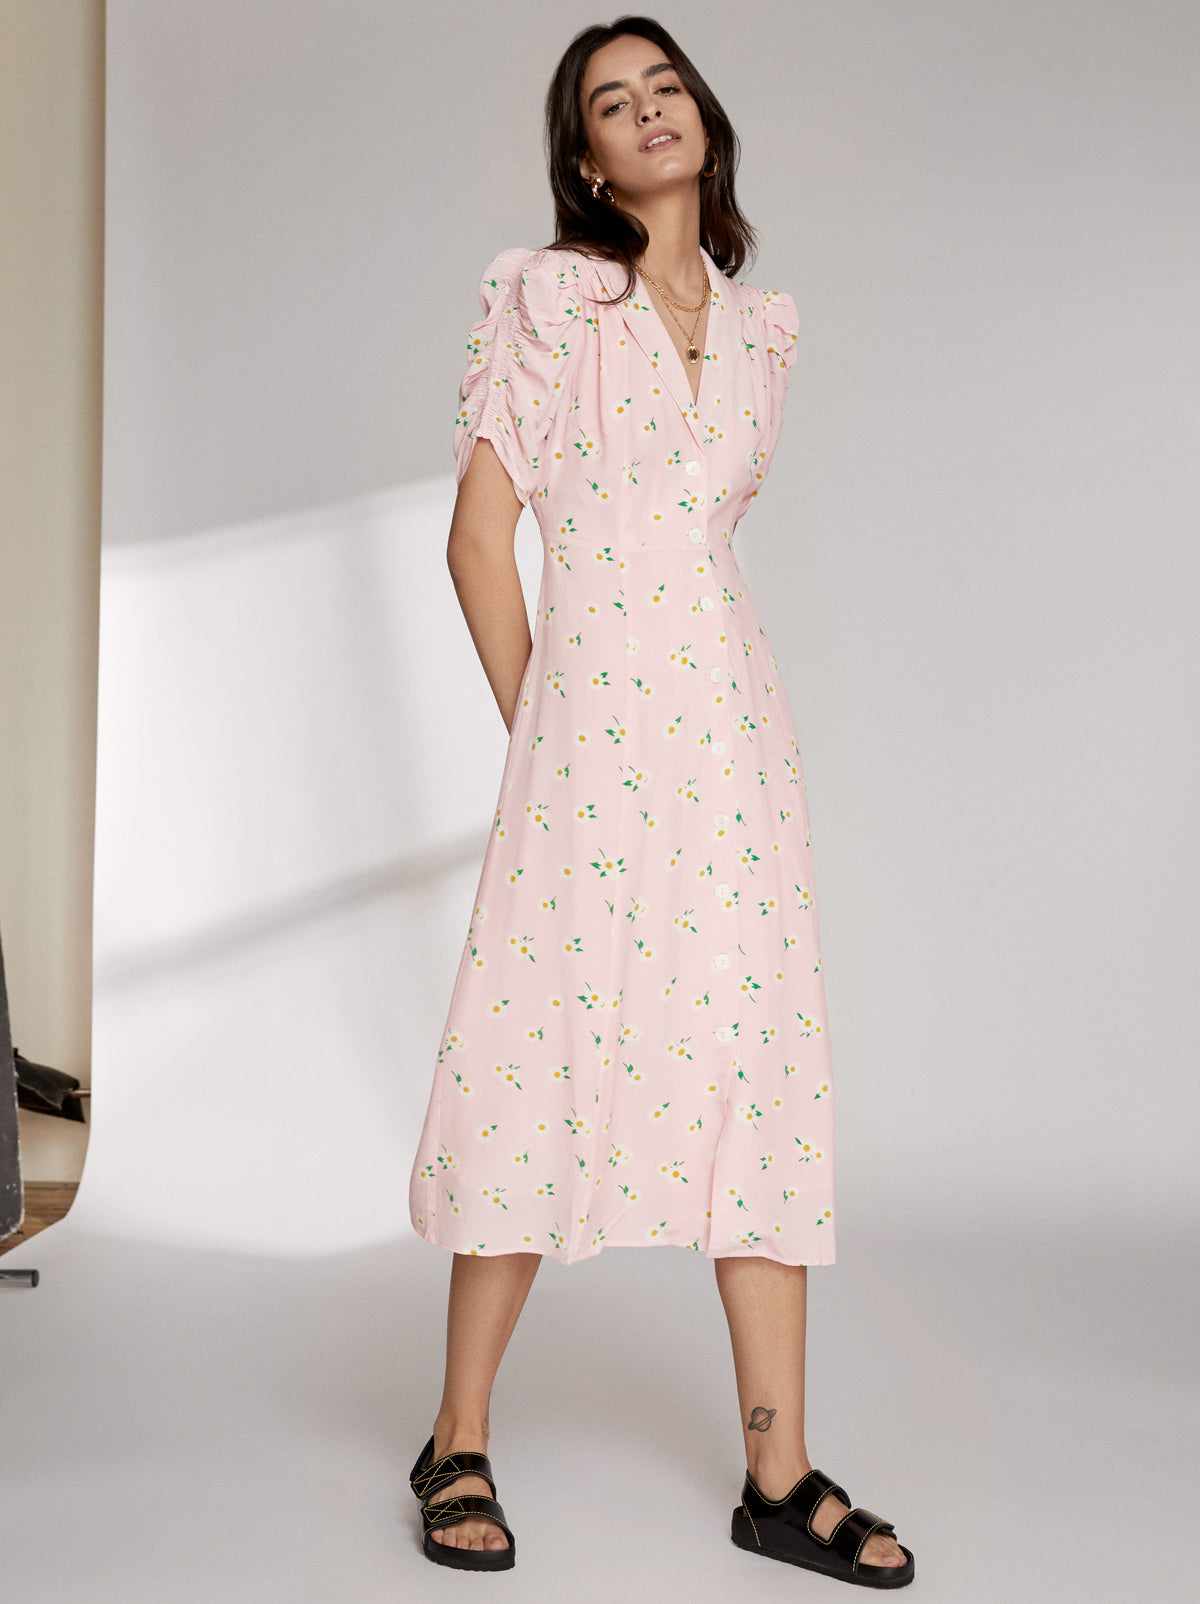 Maguire Pink Floral Dress by KITRI Studio